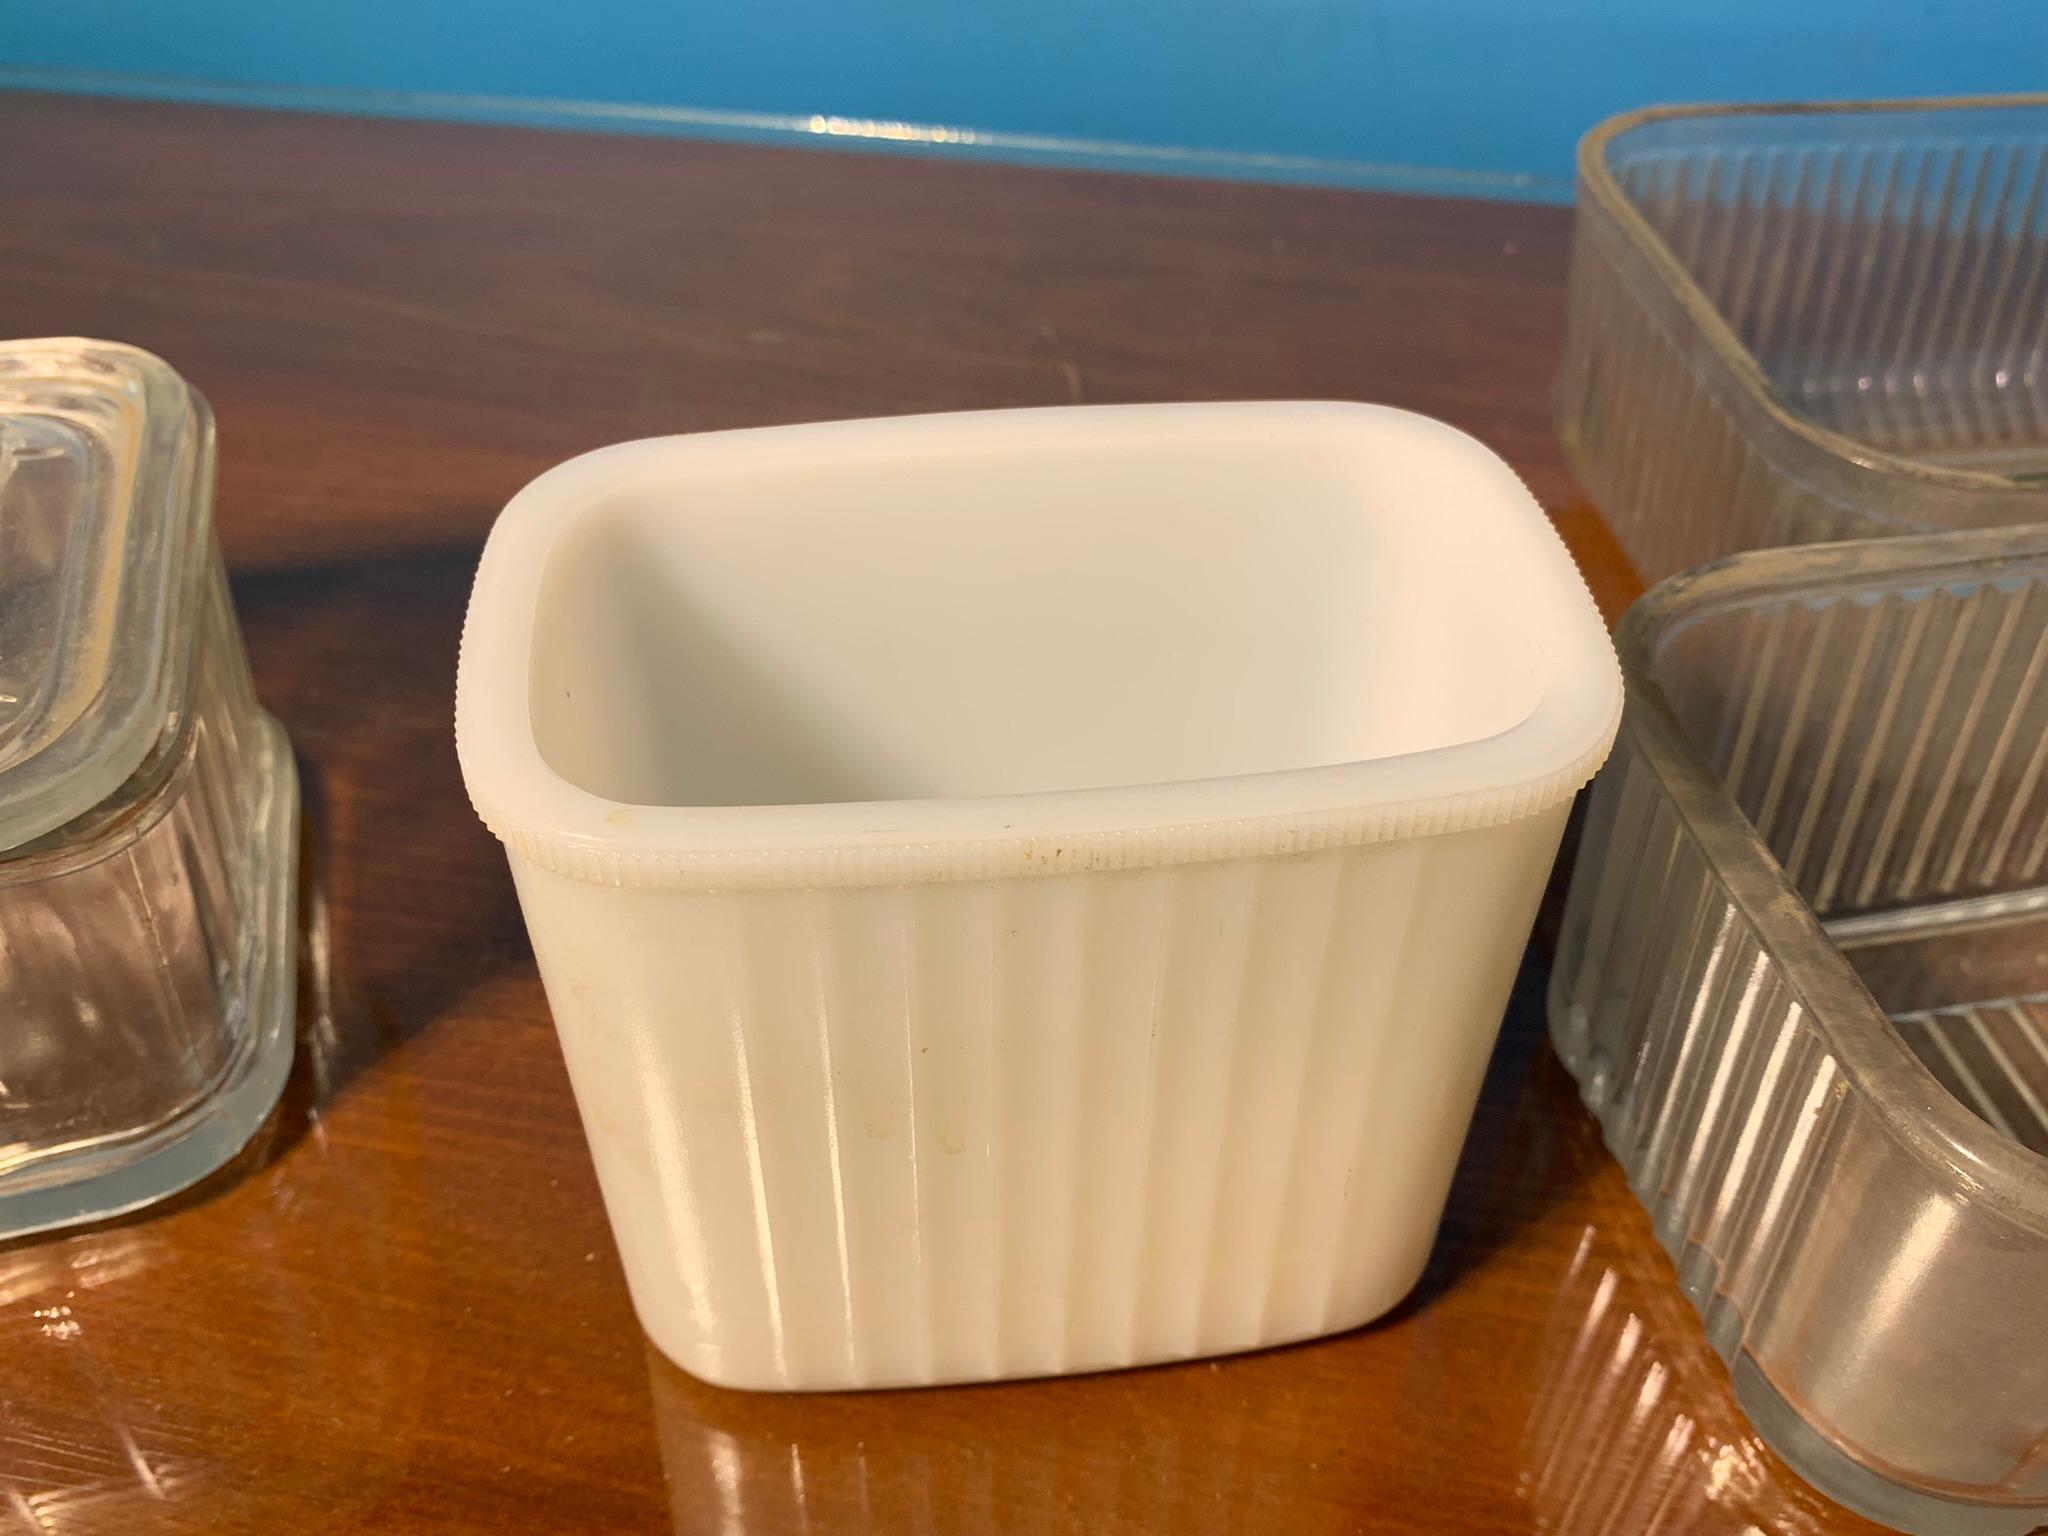 Group of Refrigerator Dishes